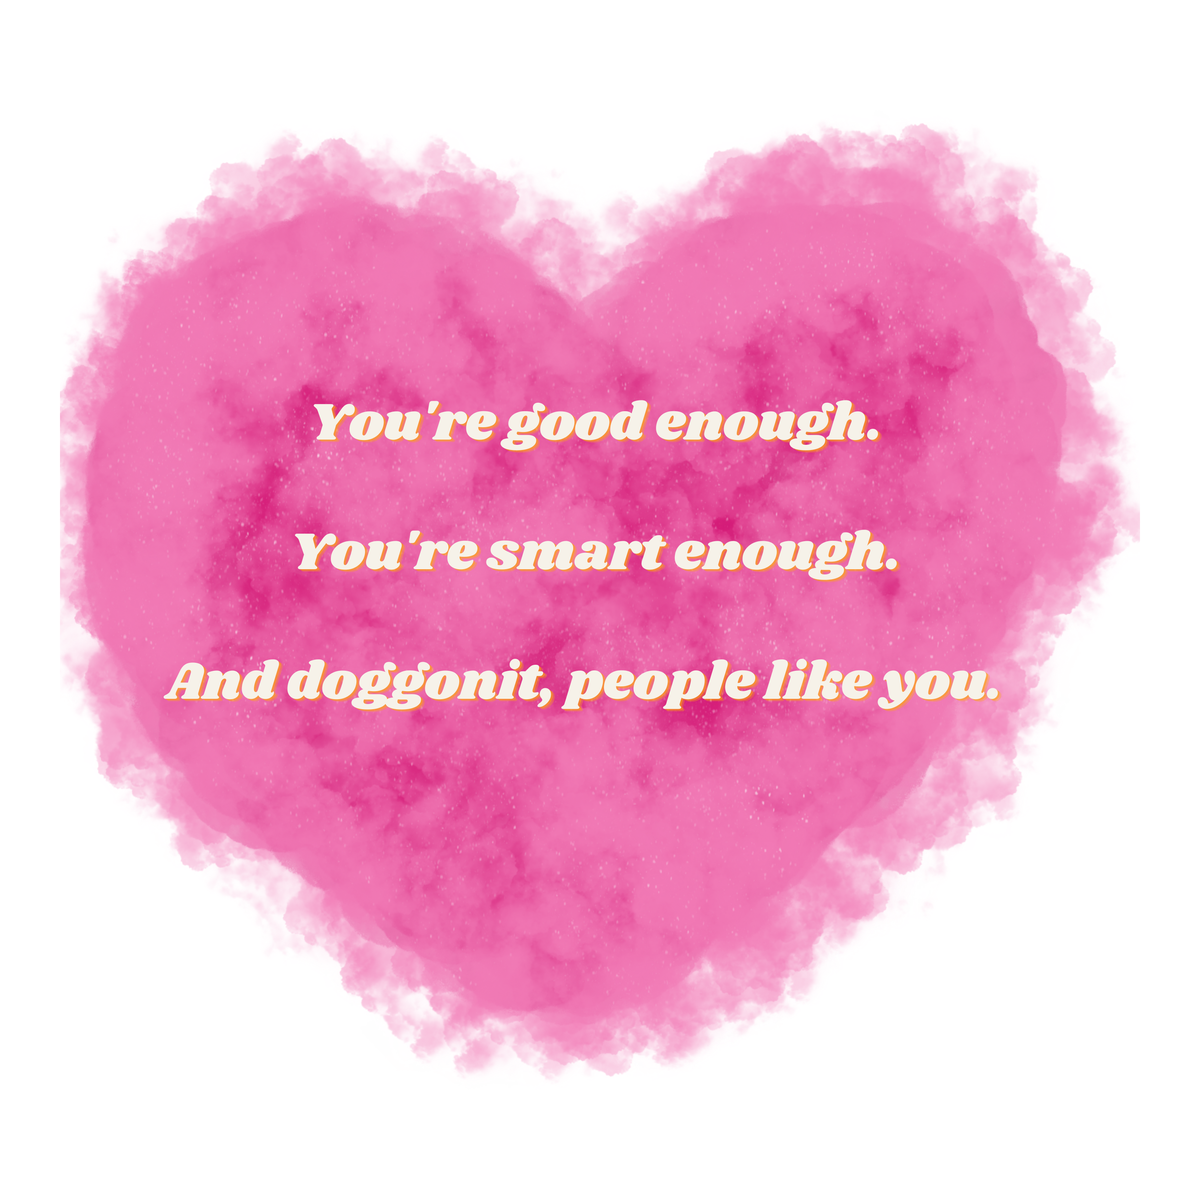 A pink cloud shaped like a heart with the words "You're good enough. You're smart enough. And doggonit, people like you."